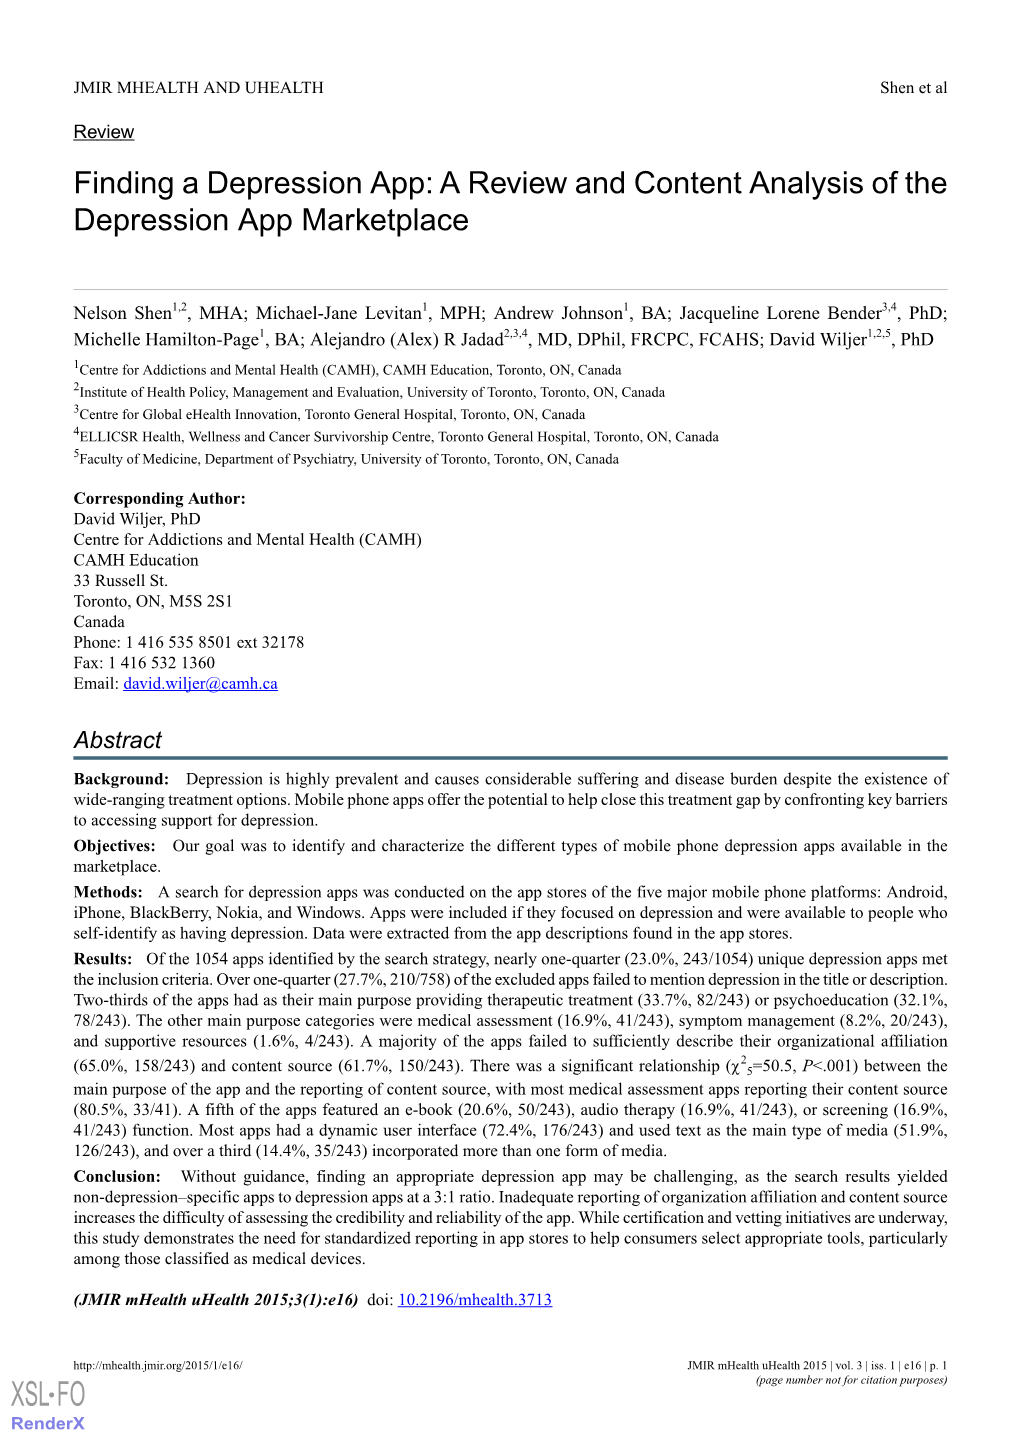 A Review and Content Analysis of the Depression App Marketplace